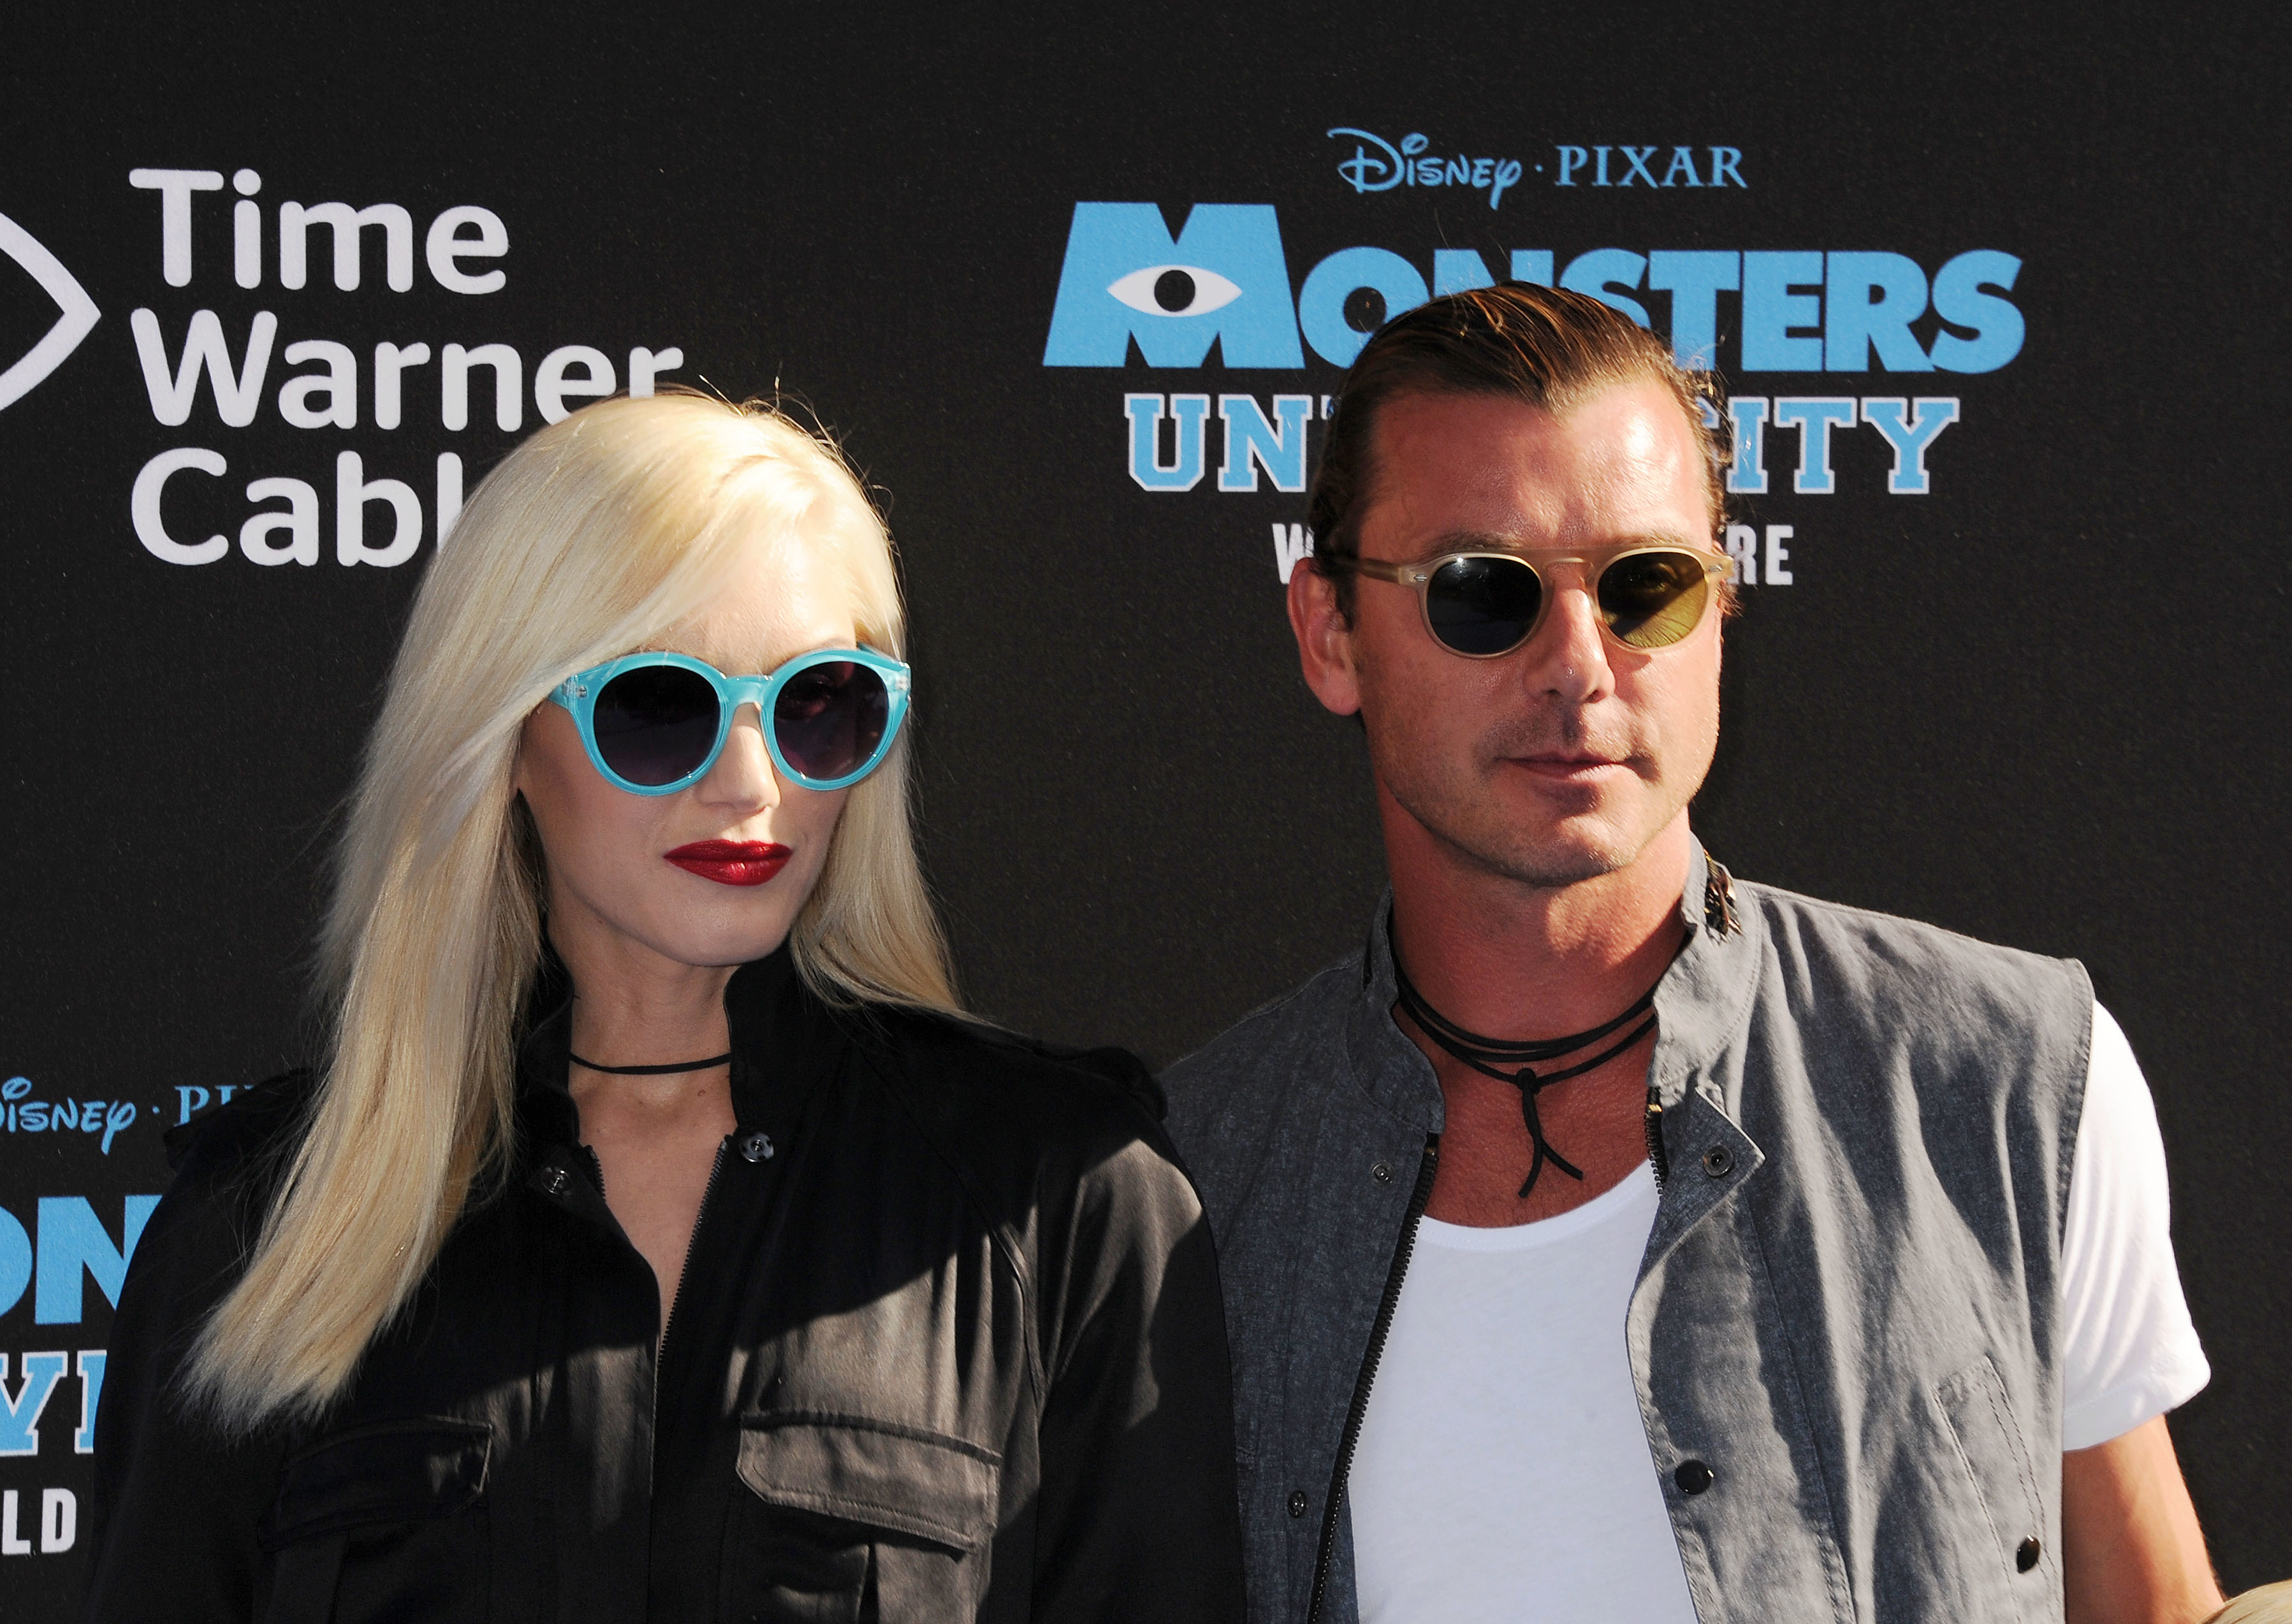 Gwen in sunglasses, and Gavin also in sunglasses, at a film event